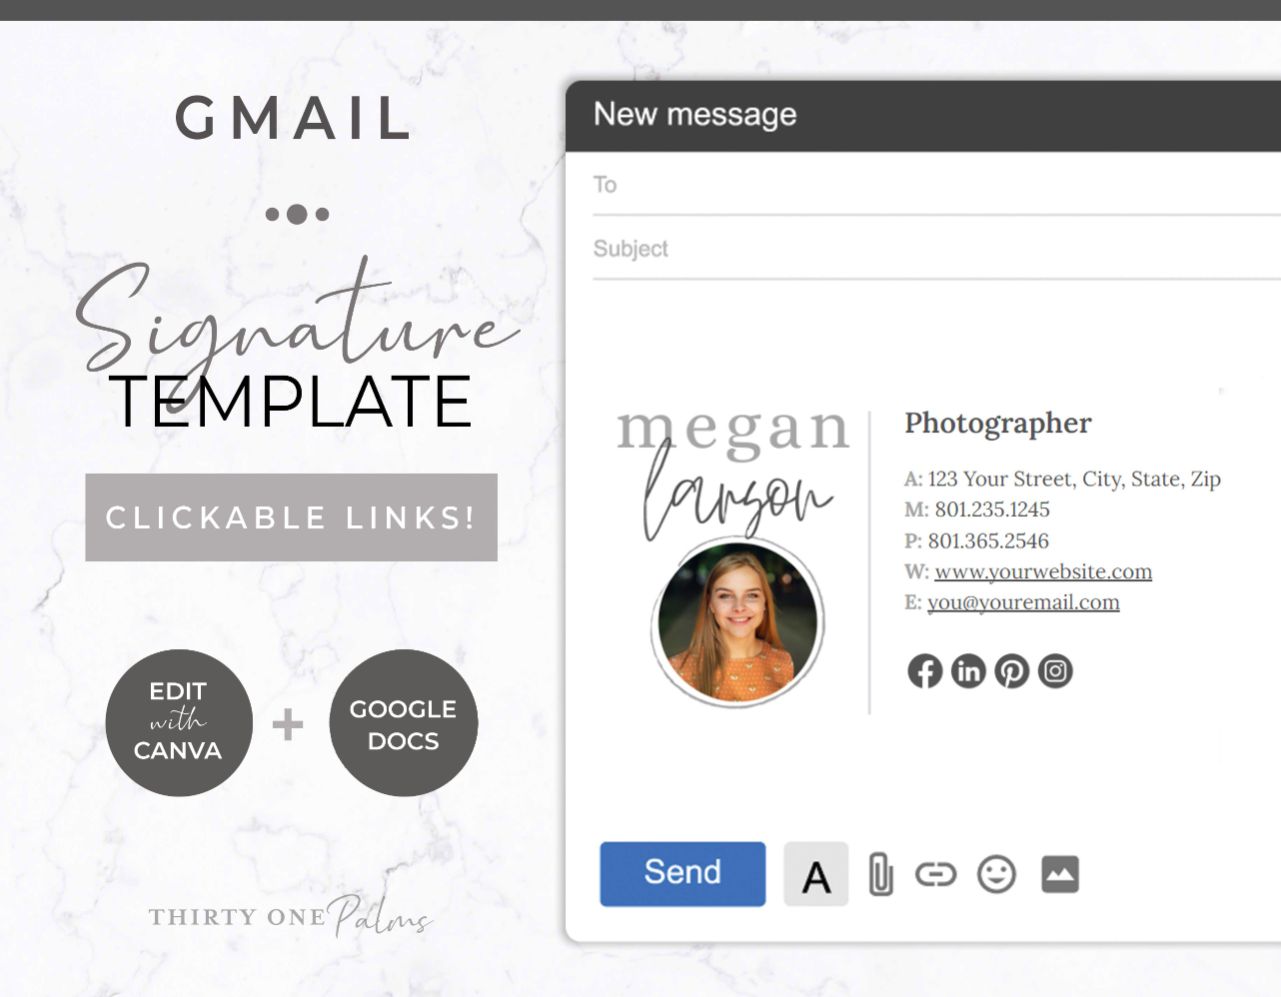 Gmail Email Signature Template for Canva Grey